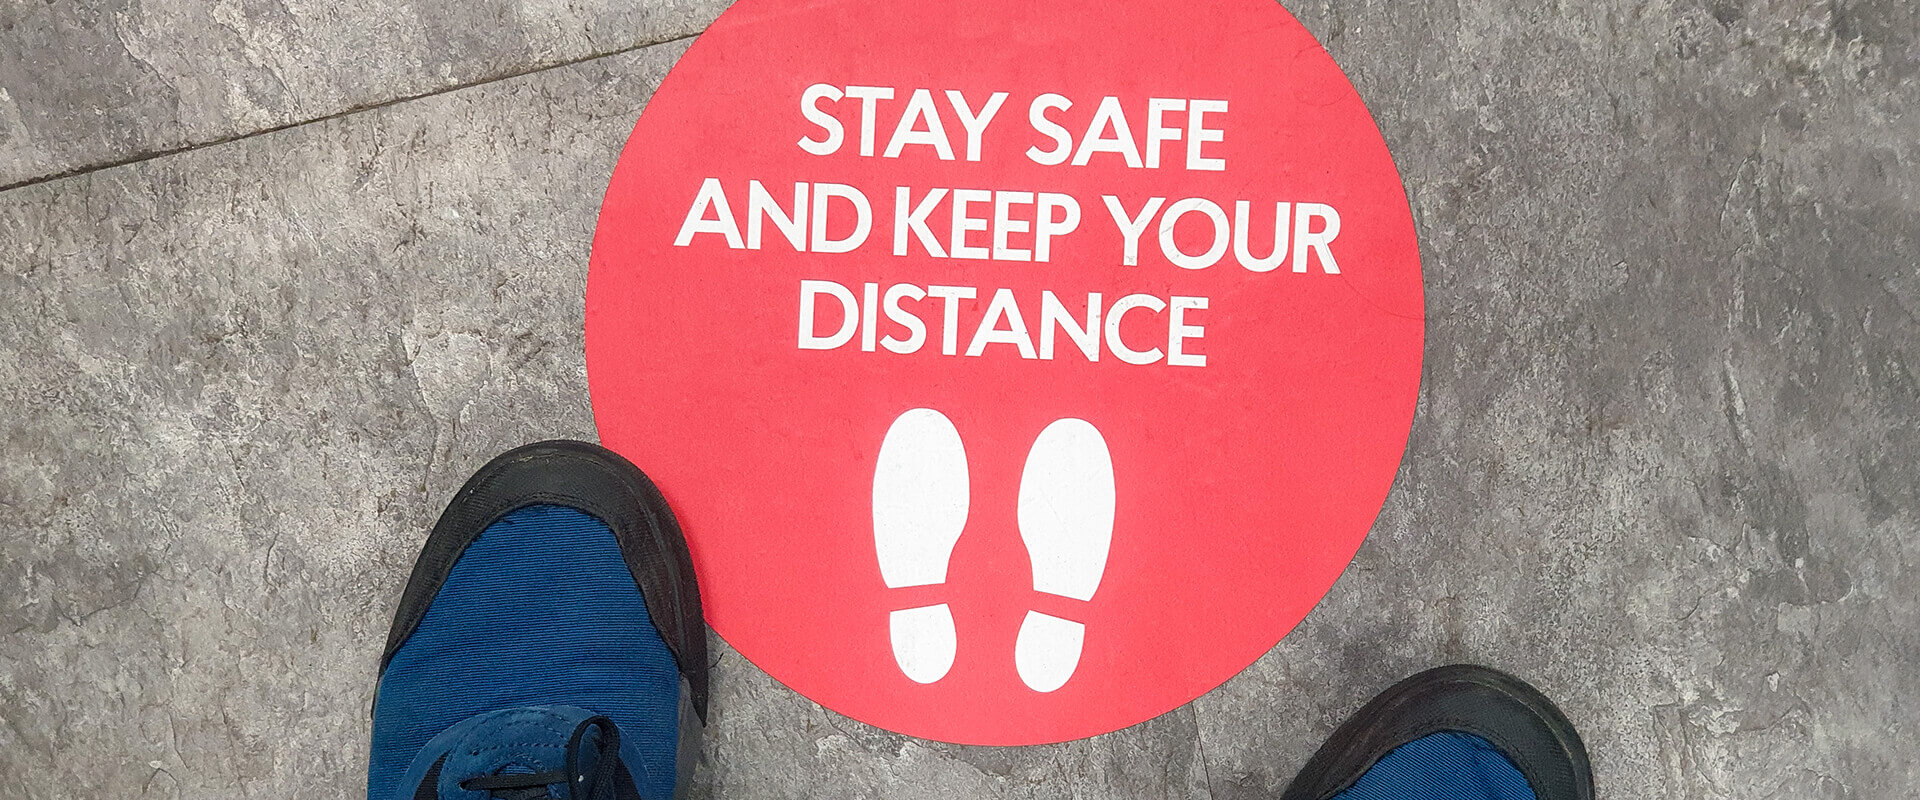 Keep your distance sign on floor